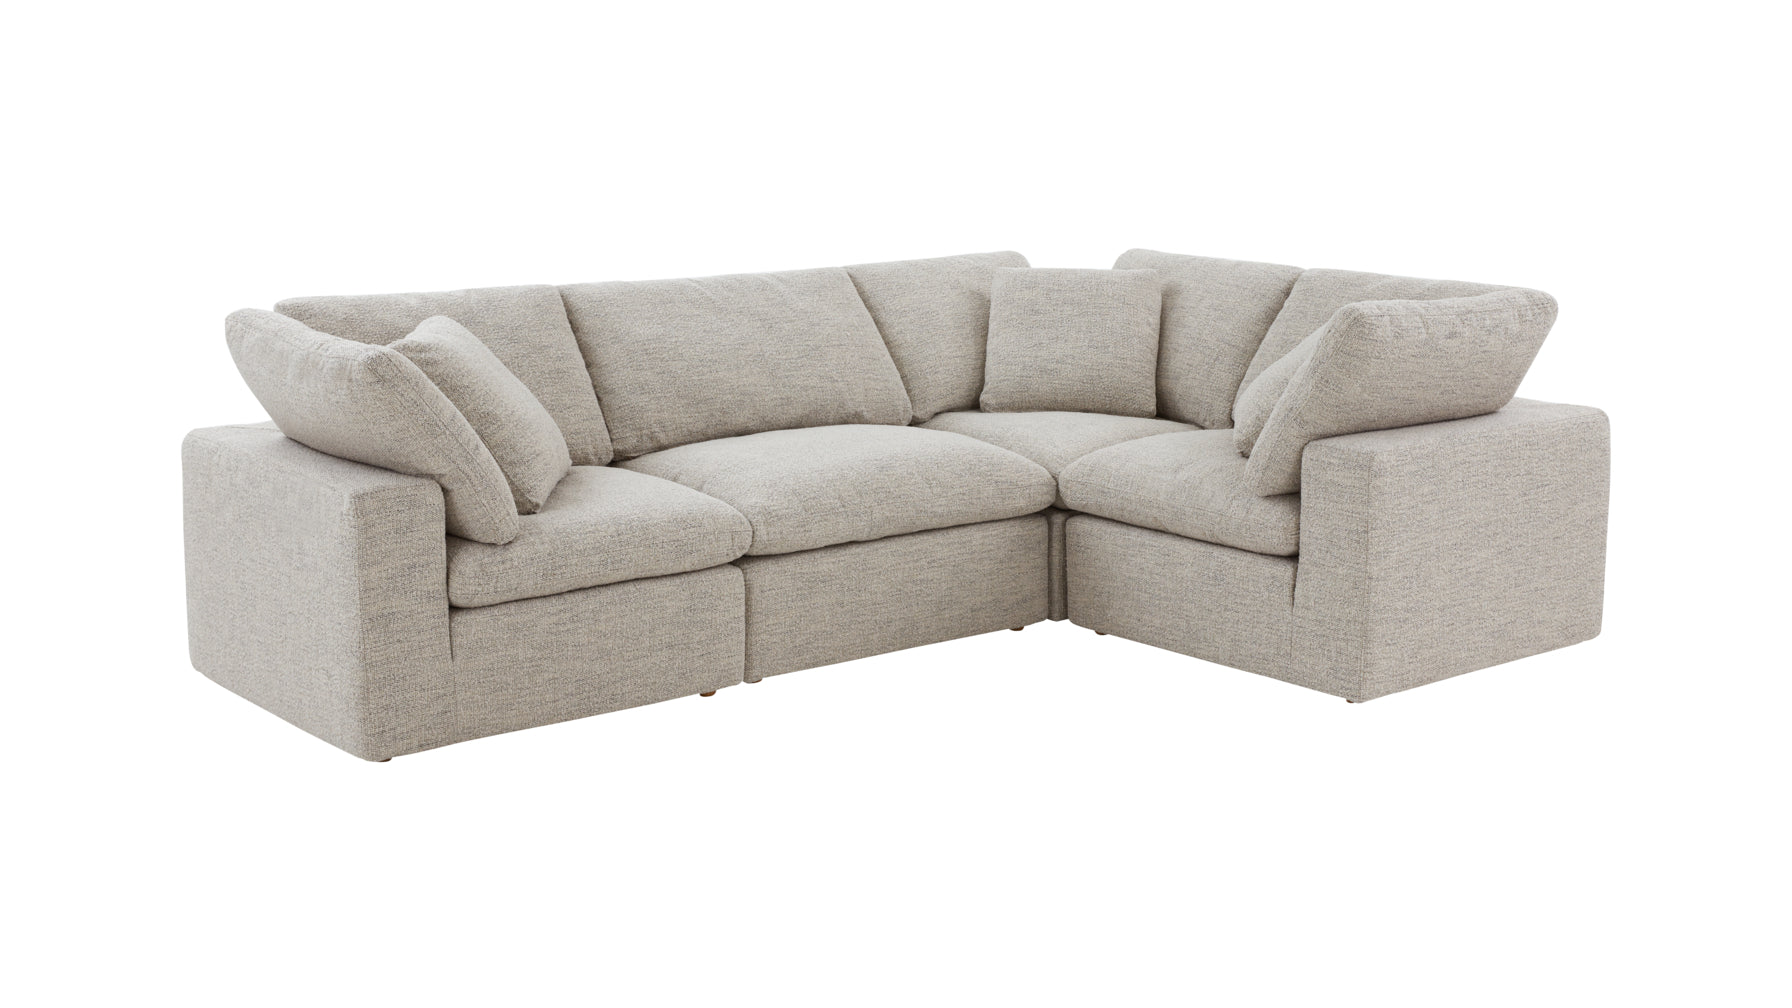 Movie Night™ 4-Piece Modular Sectional Closed, Standard, Oatmeal - Image 4